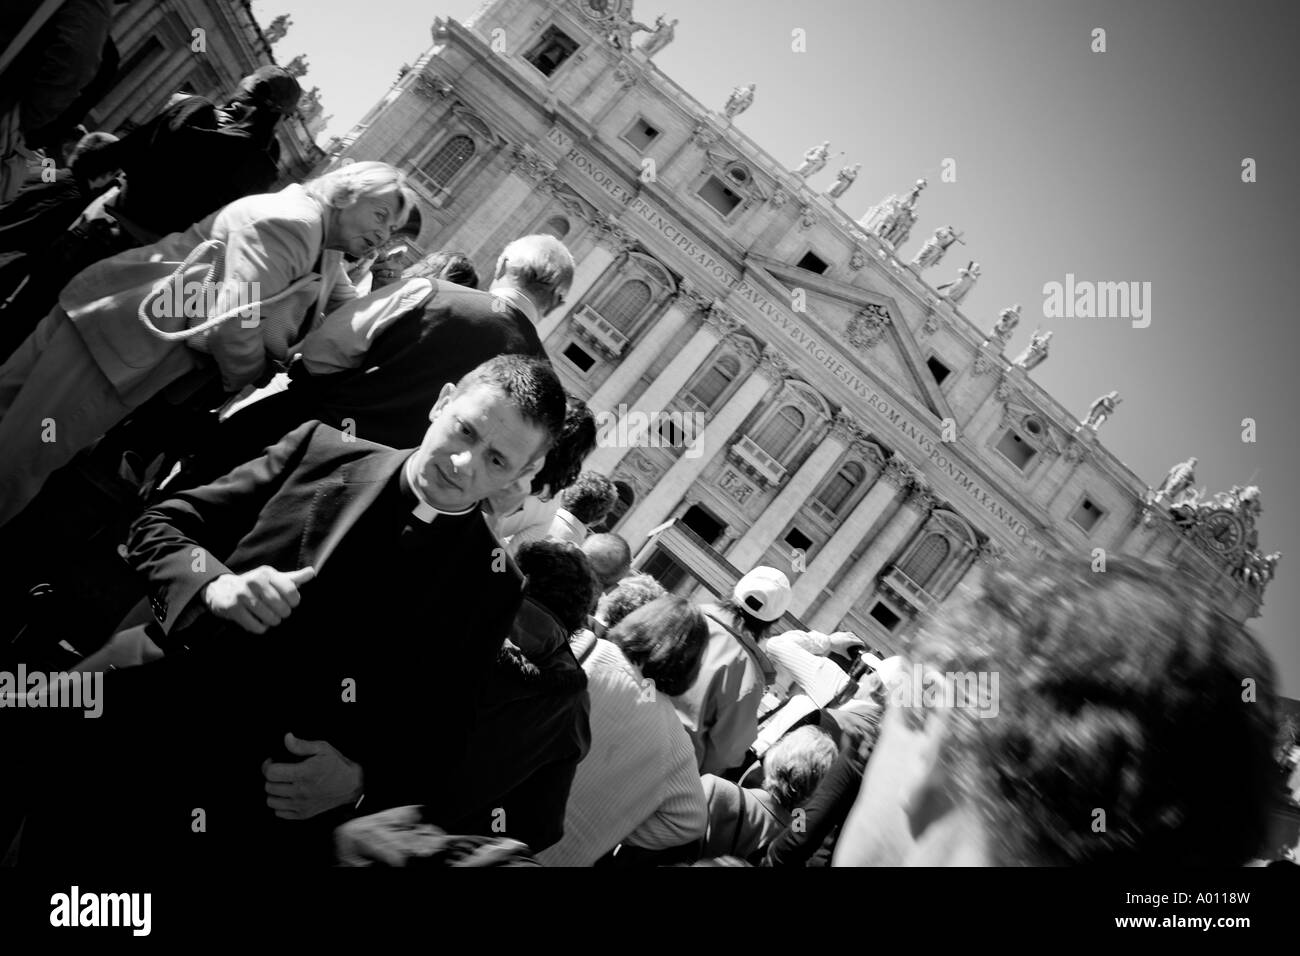 preist caught in a frenzy at the vatican Stock Photo